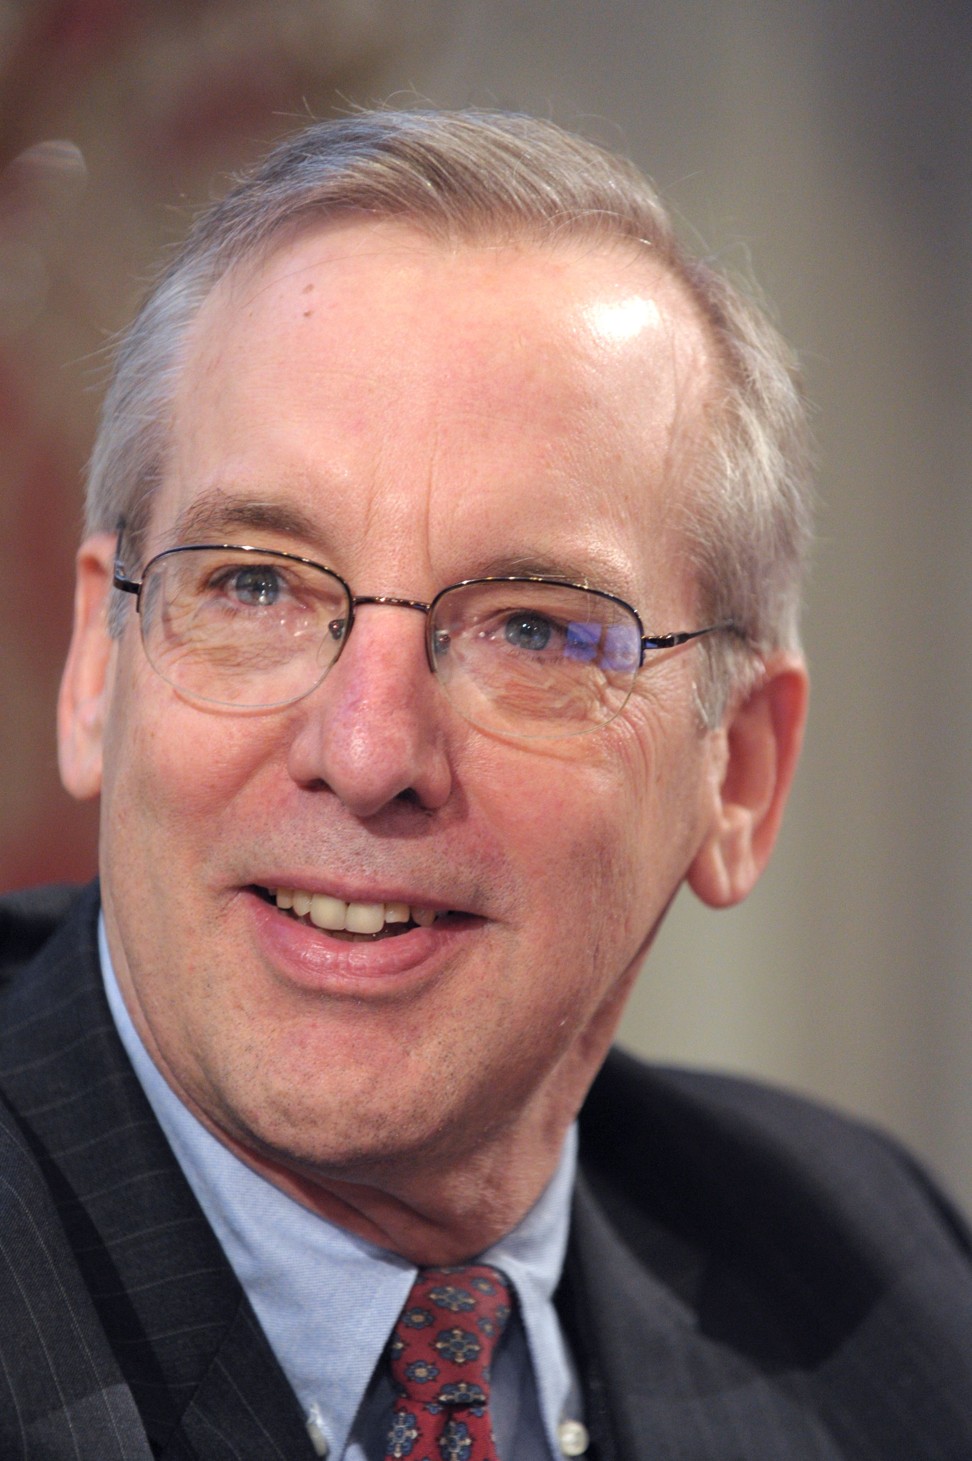 William Dudley, president and CEO of the Federal Reserve Bank of New York. Photo: Agence France-Presse